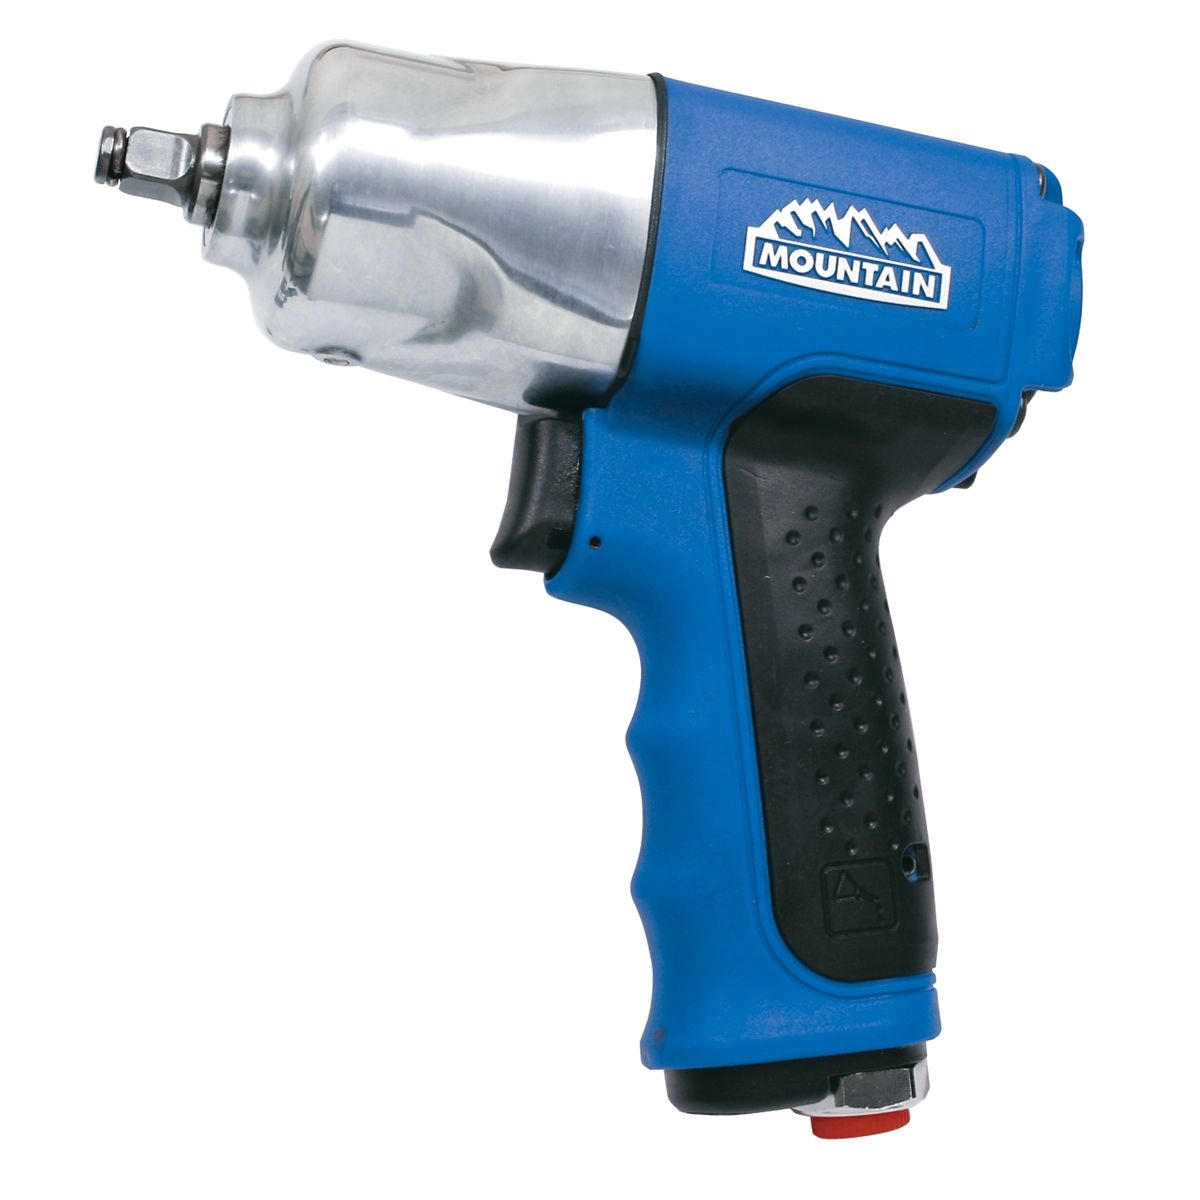 3/8" Drive Composite Impact Wrench